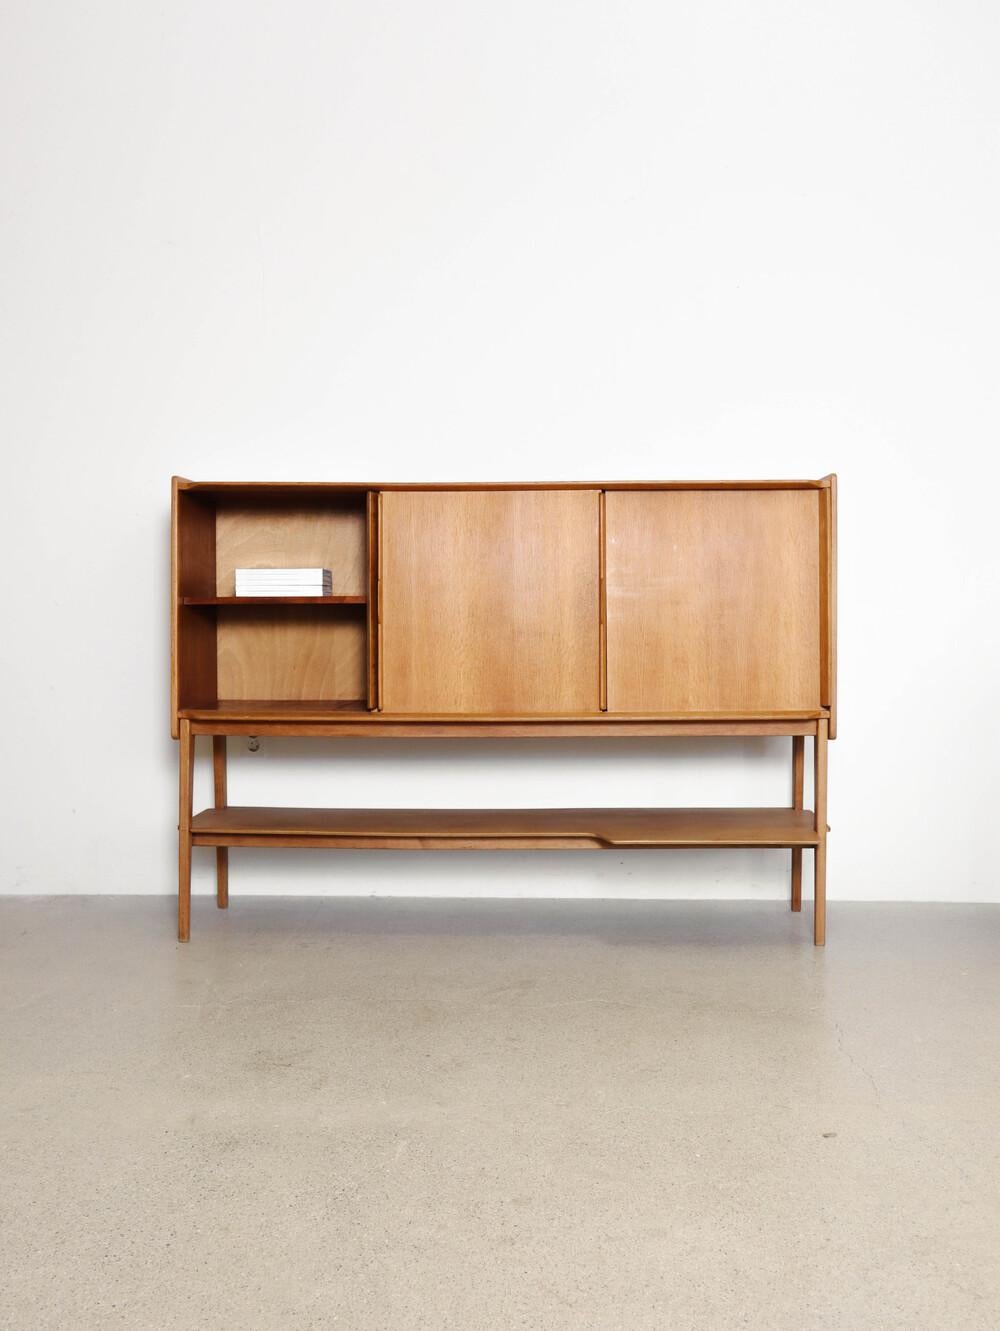 A beautiful example of French Mid-Century design by Roger Landault.  